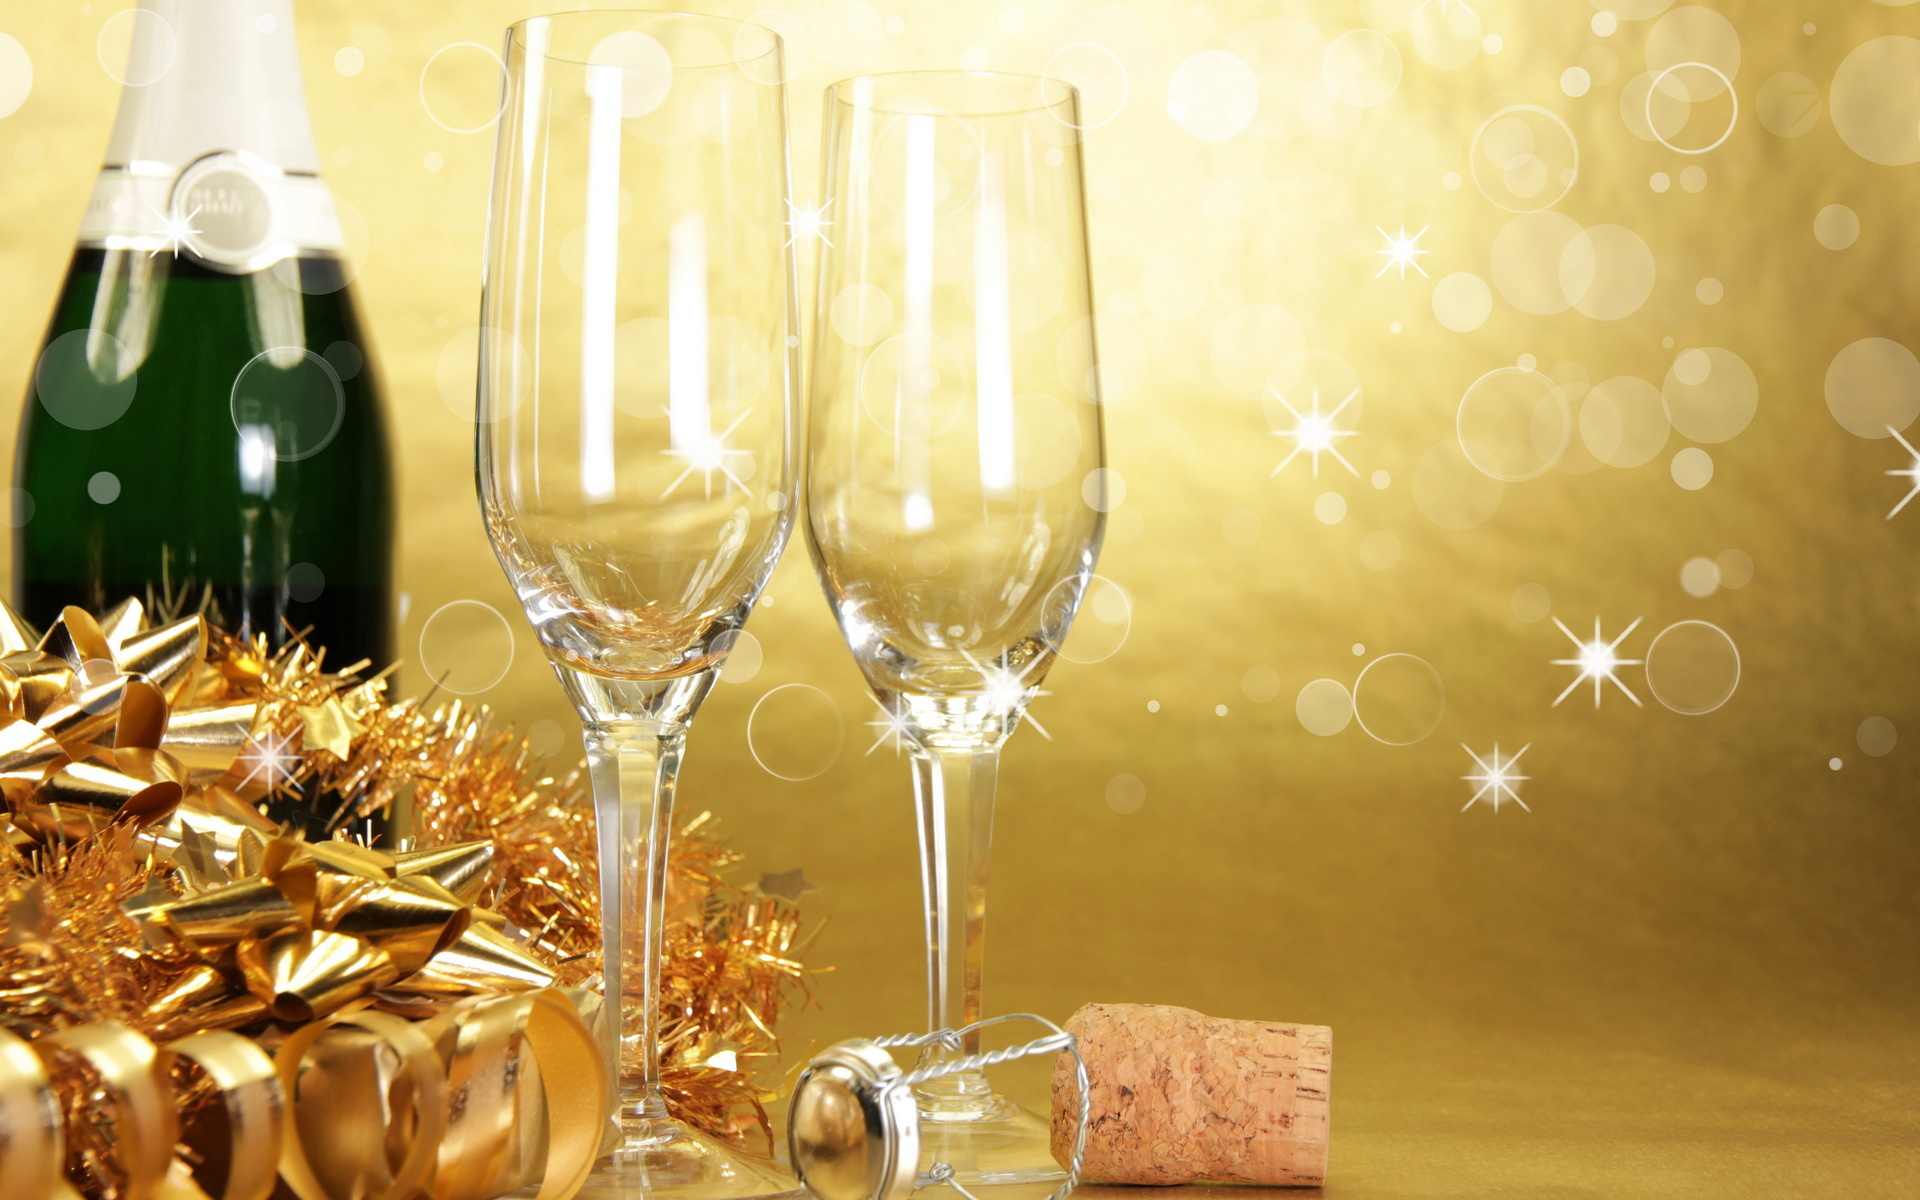 Make Your New Year’s Eve Brilliant!